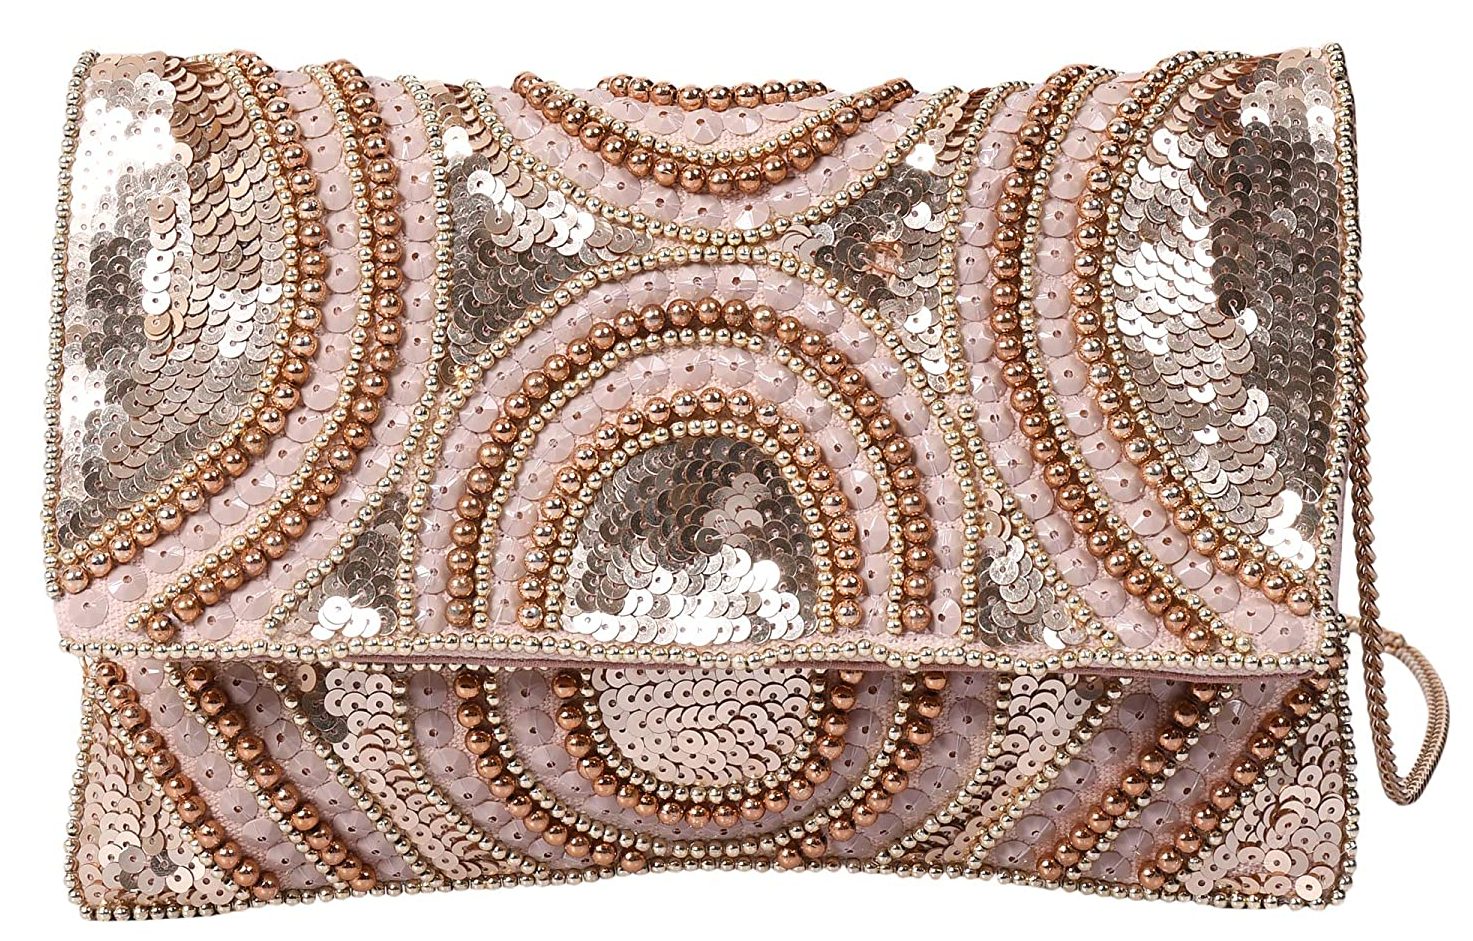 Women's Beige Color with Gold Tone embellished Beaded Clutch